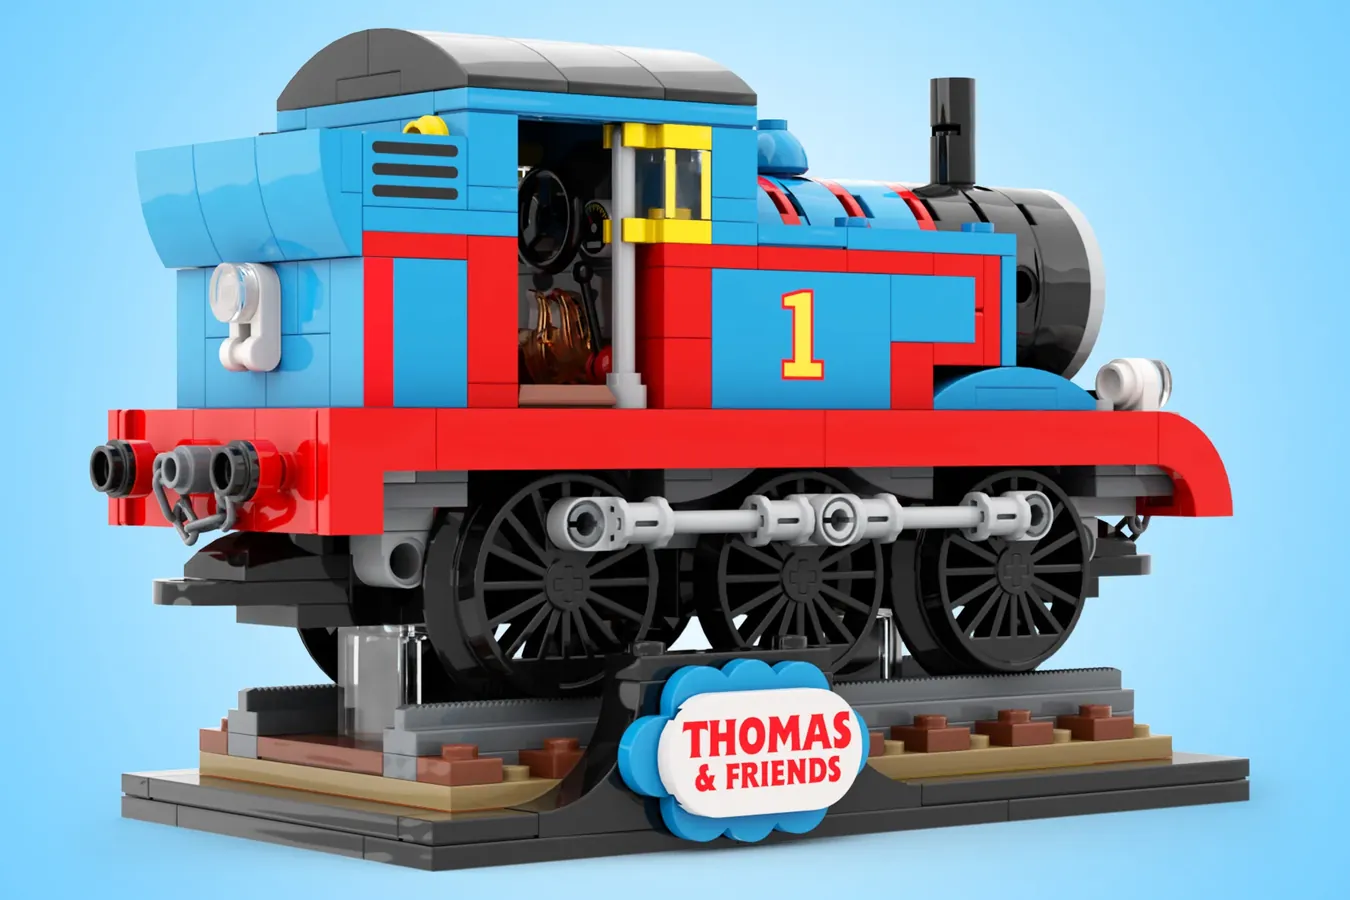 Lego® Thomas the Tank Engine” advances into product review: 2nd 10,000 support design introduction in 2022